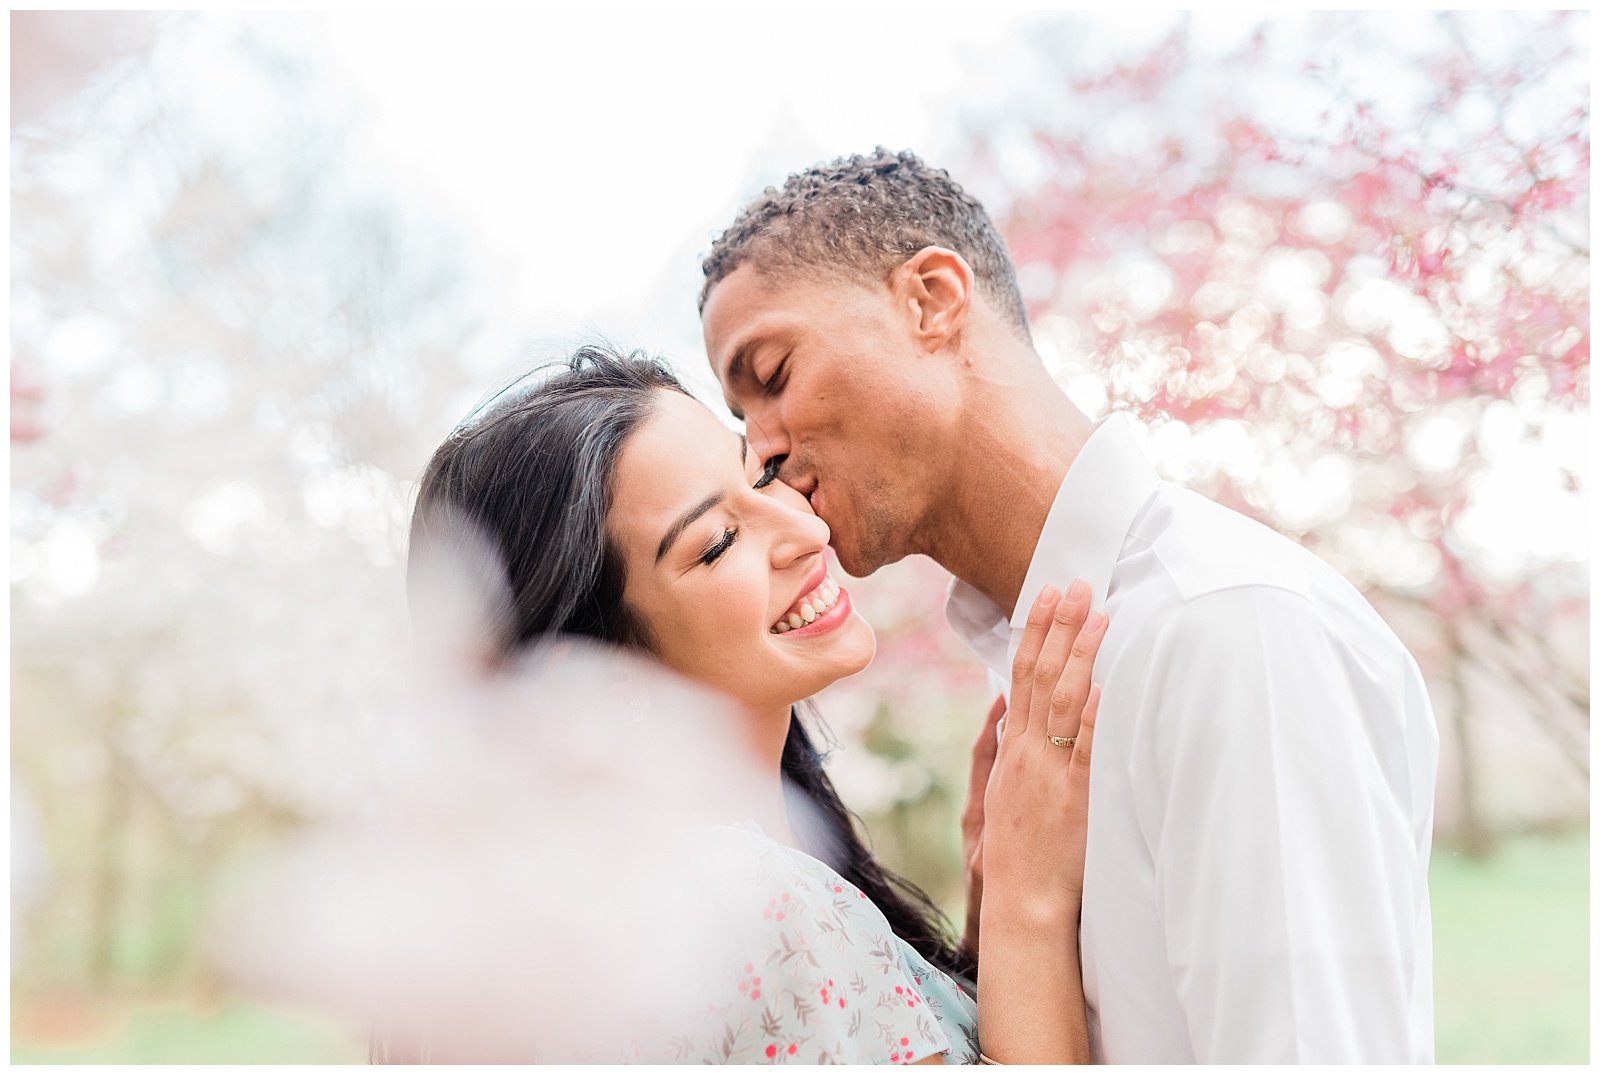 A man kisses his fiance on the cheek among the cherry blossom trees.